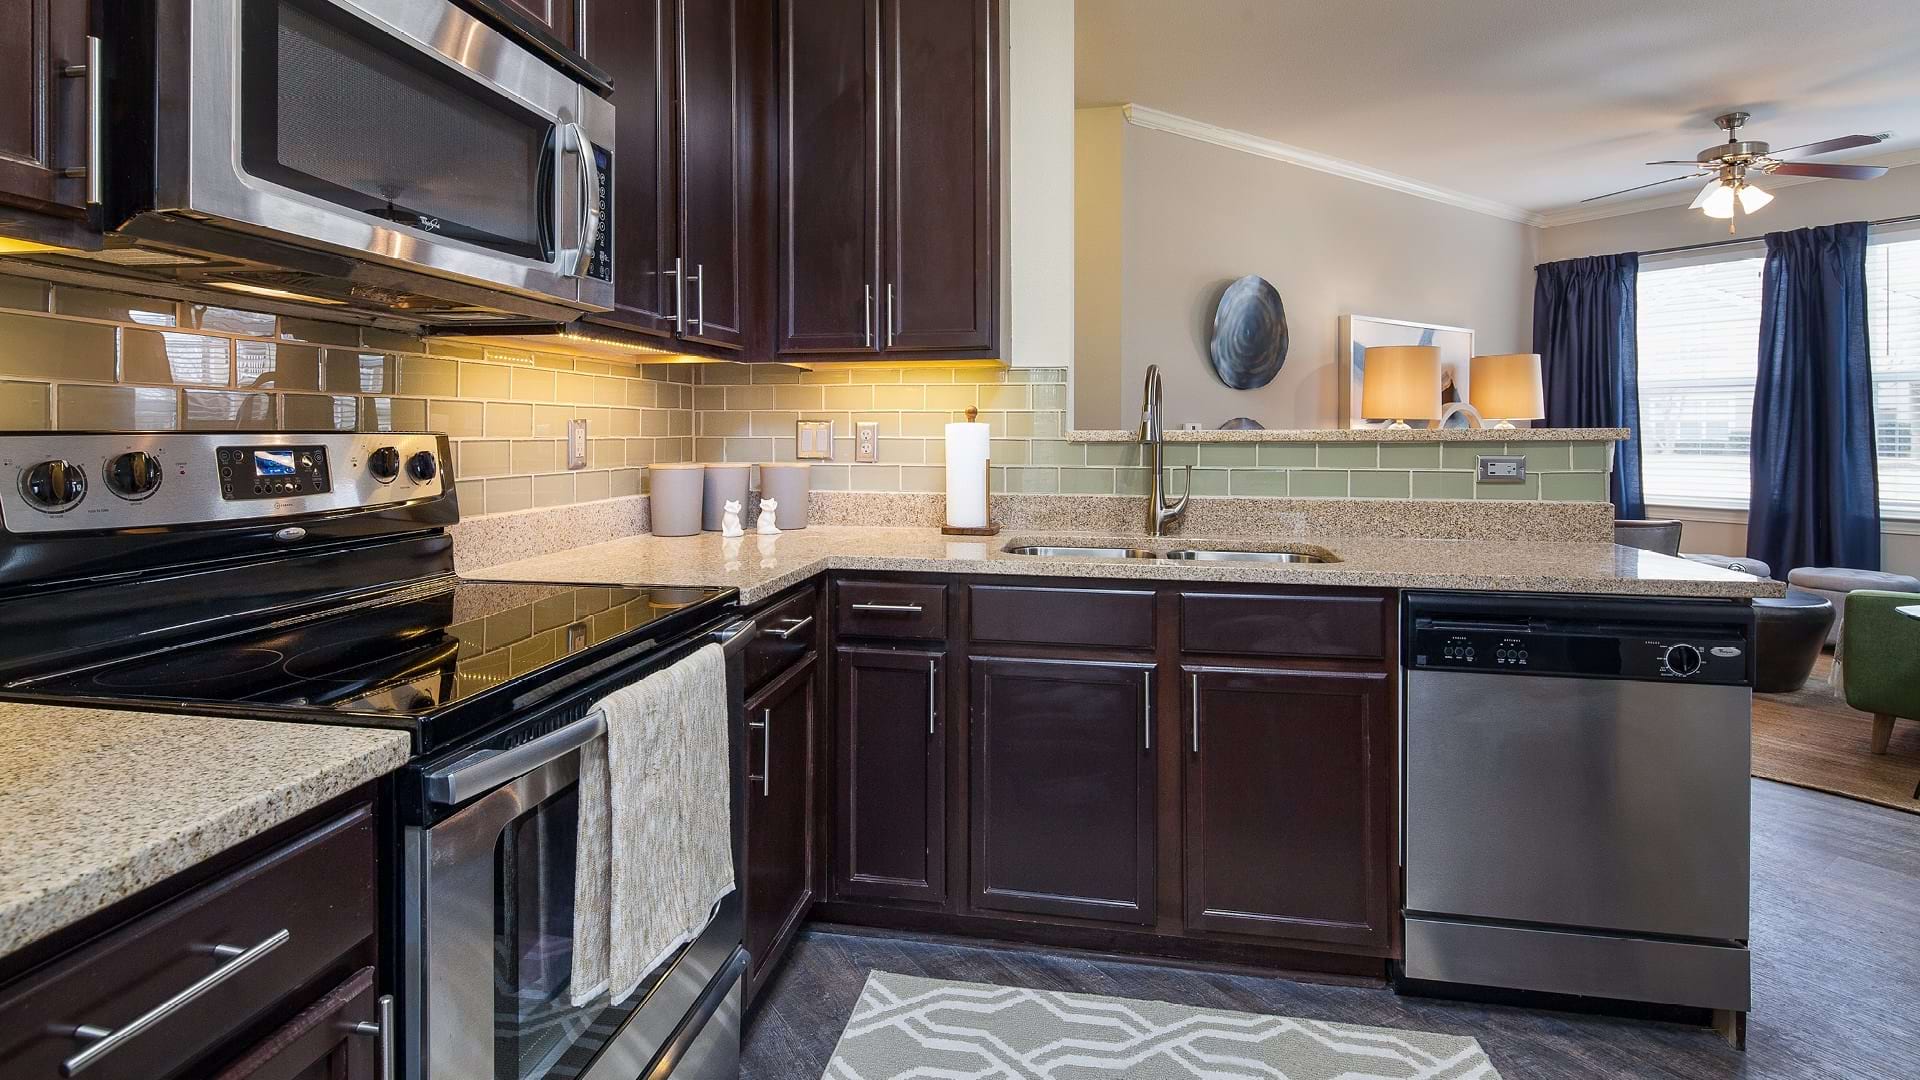 Modern Kitchen With Dark Cabinets And Stainless Steel Appliances At Our University Place Apartments